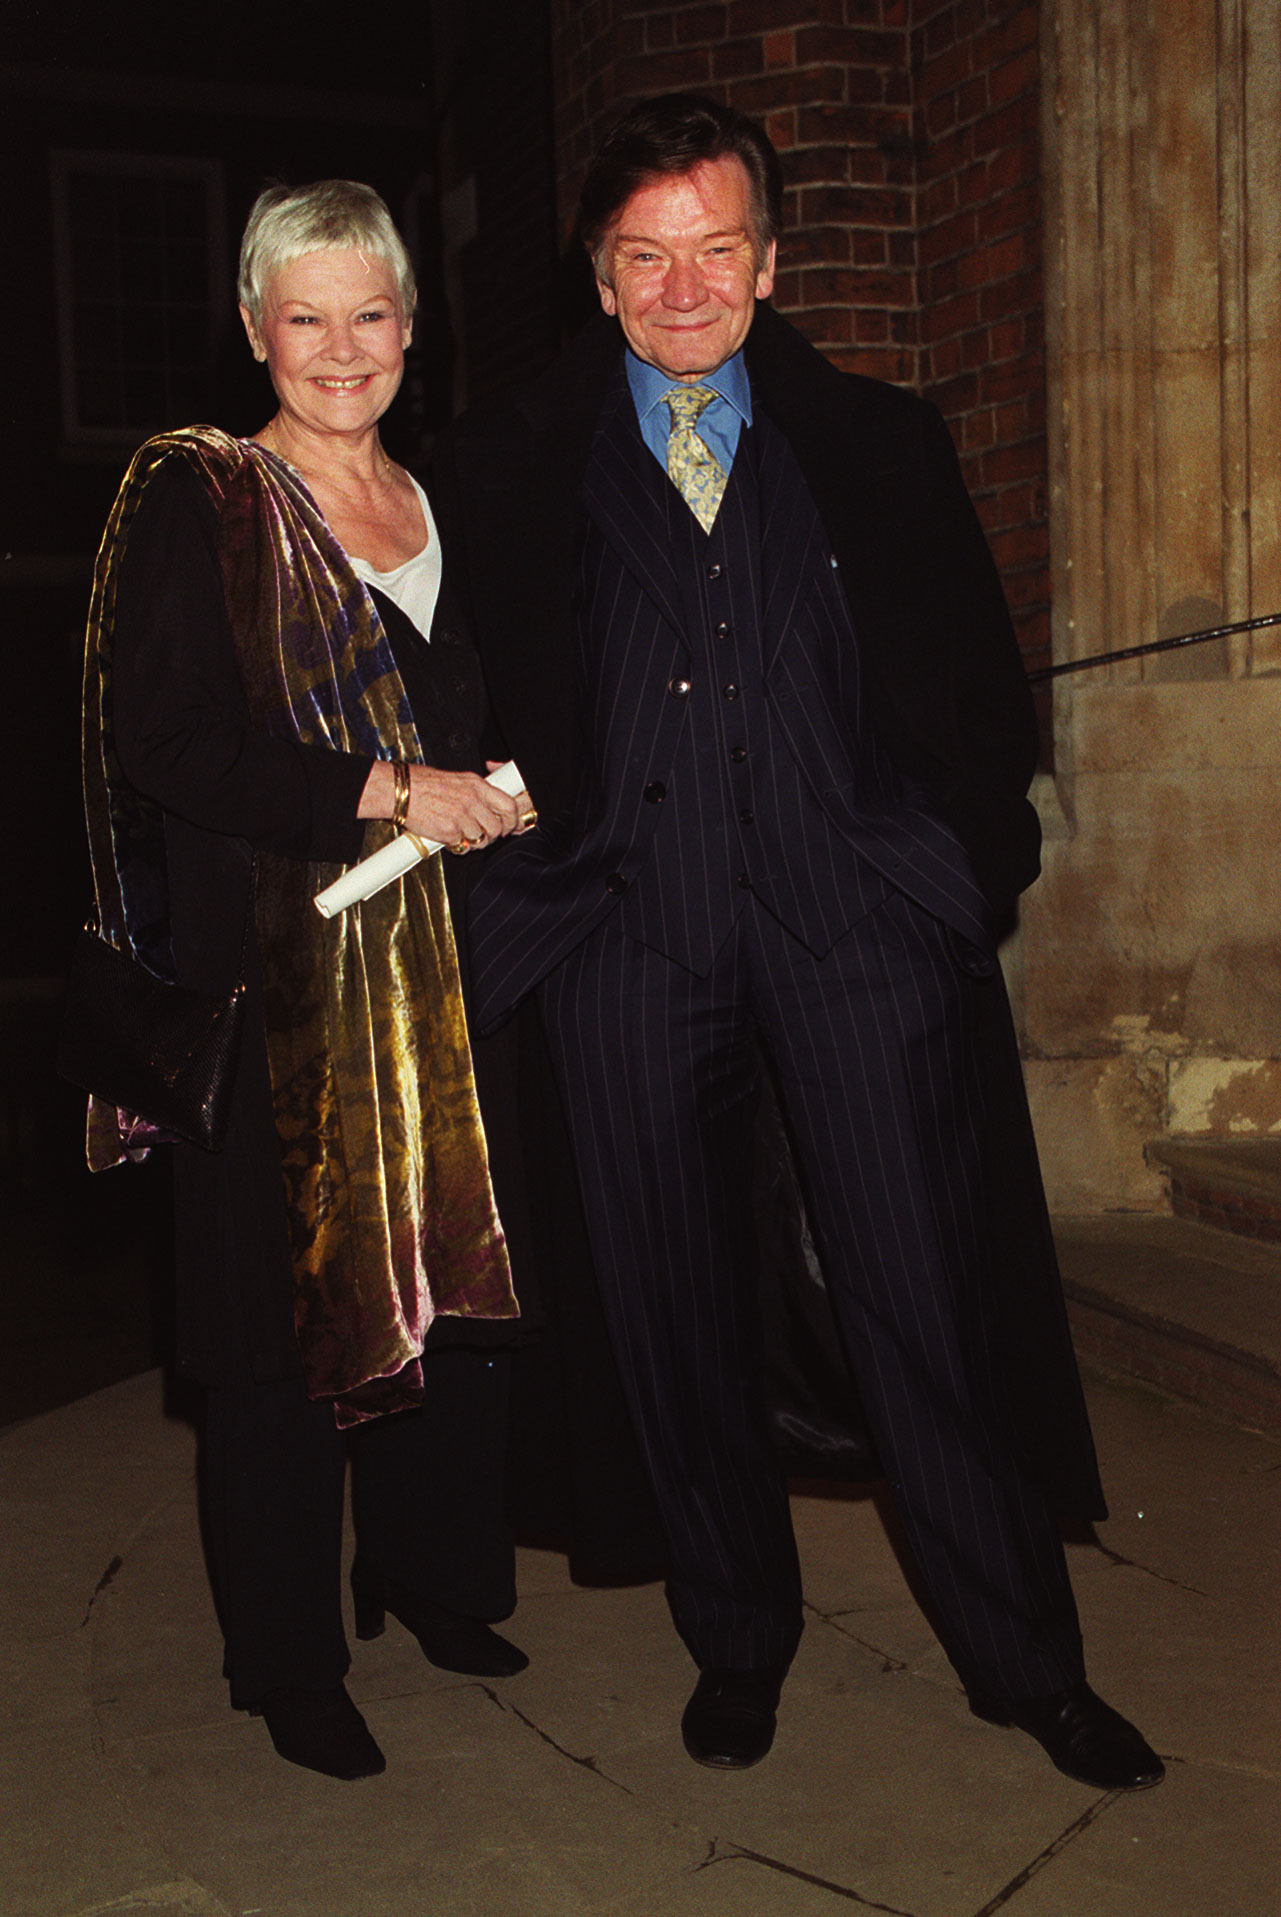 Dame Judi Dench and Michael Williams at London's historic Middle Temple Hall on January 16, 2000. | Source: Getty Images